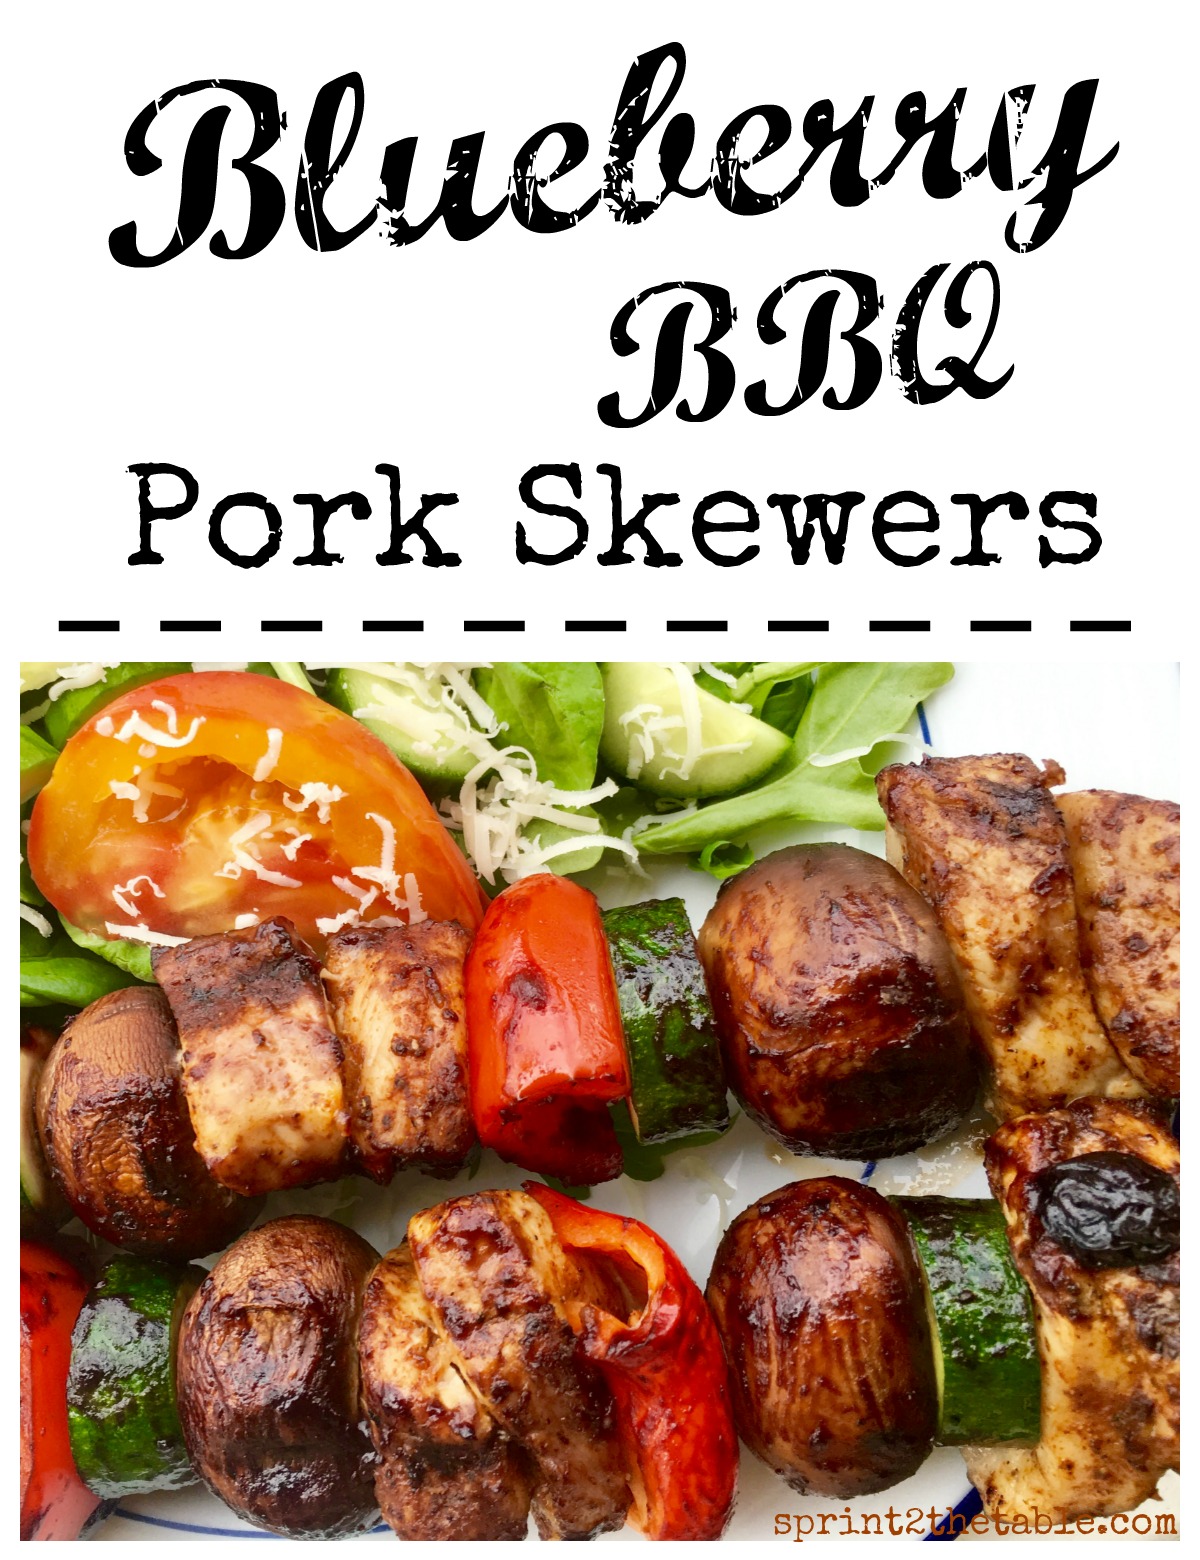 Blueberry BBQ Pork Skewers - a sweet-n-savory recipe for the grill!